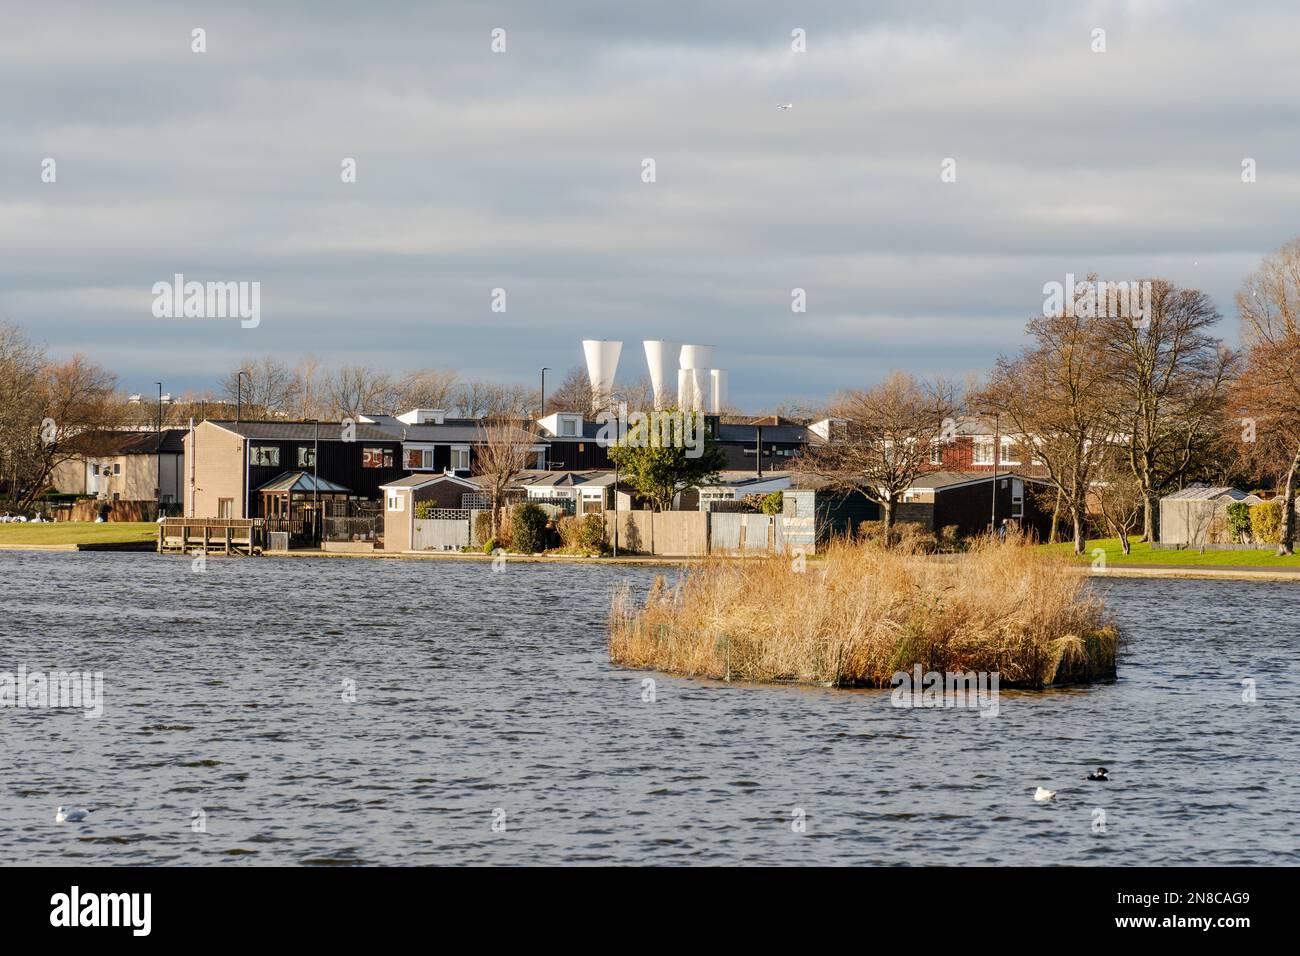 A floating island for birds and houses by the lake in Killingworth New Town, North Tyneside, UK. Stock Photo